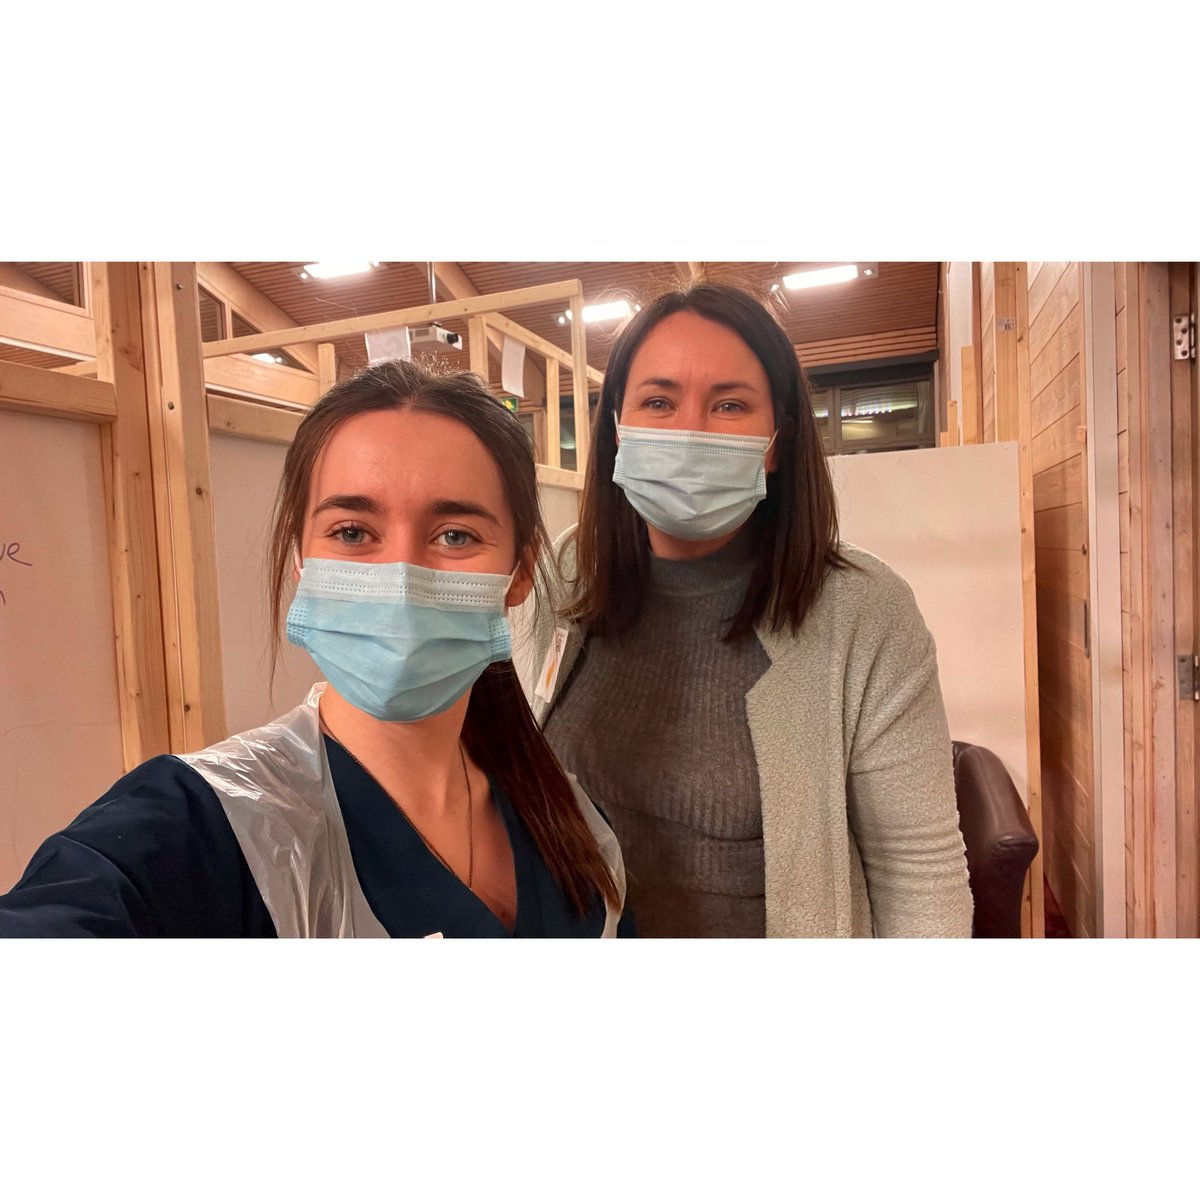 • As everyone knows we do everything together so tonight Mumma came to help with vaccinations at Trinity, loved working together! 🥰
•
•
•
• #nhs #covid #covid19 #vaccinations #suffolk #trinitypark #immuniser #lockdown #coronovirus2021